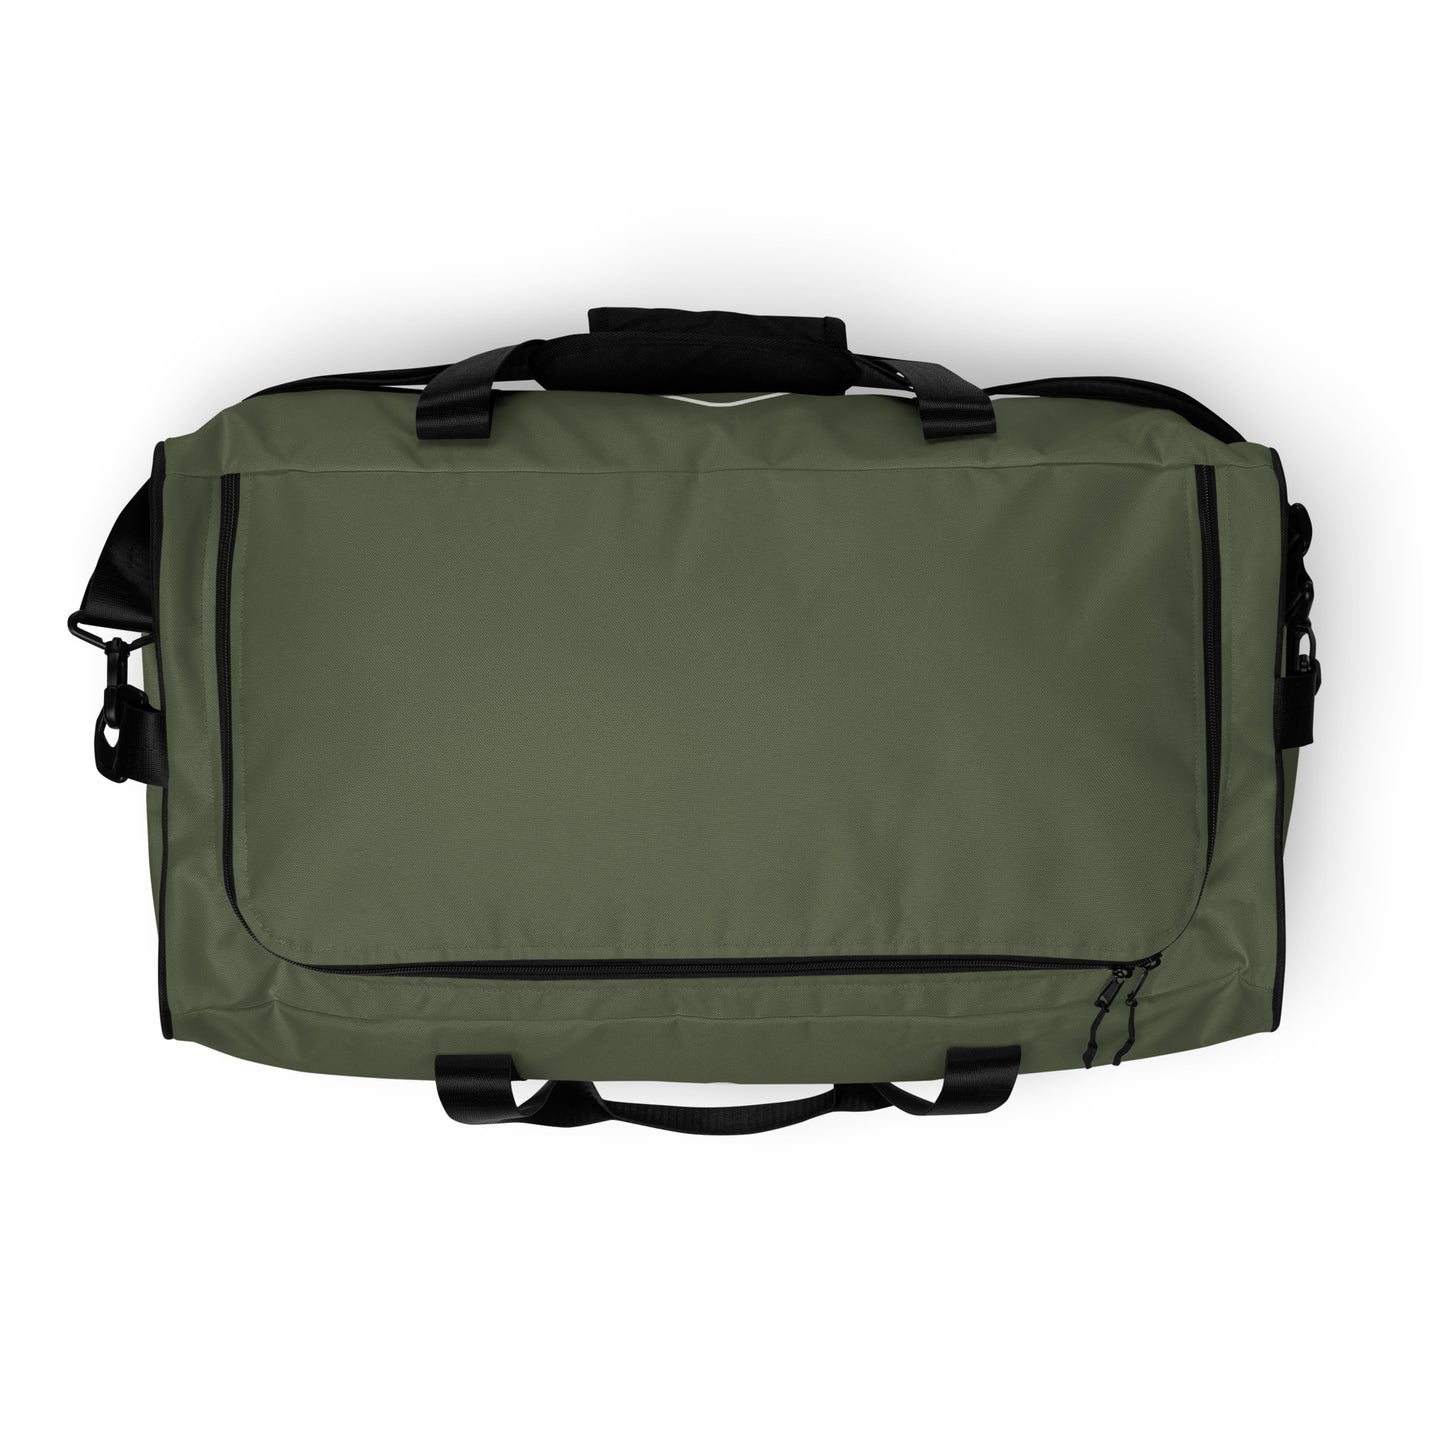 Badlands Extra Large Duffle Bag in army green